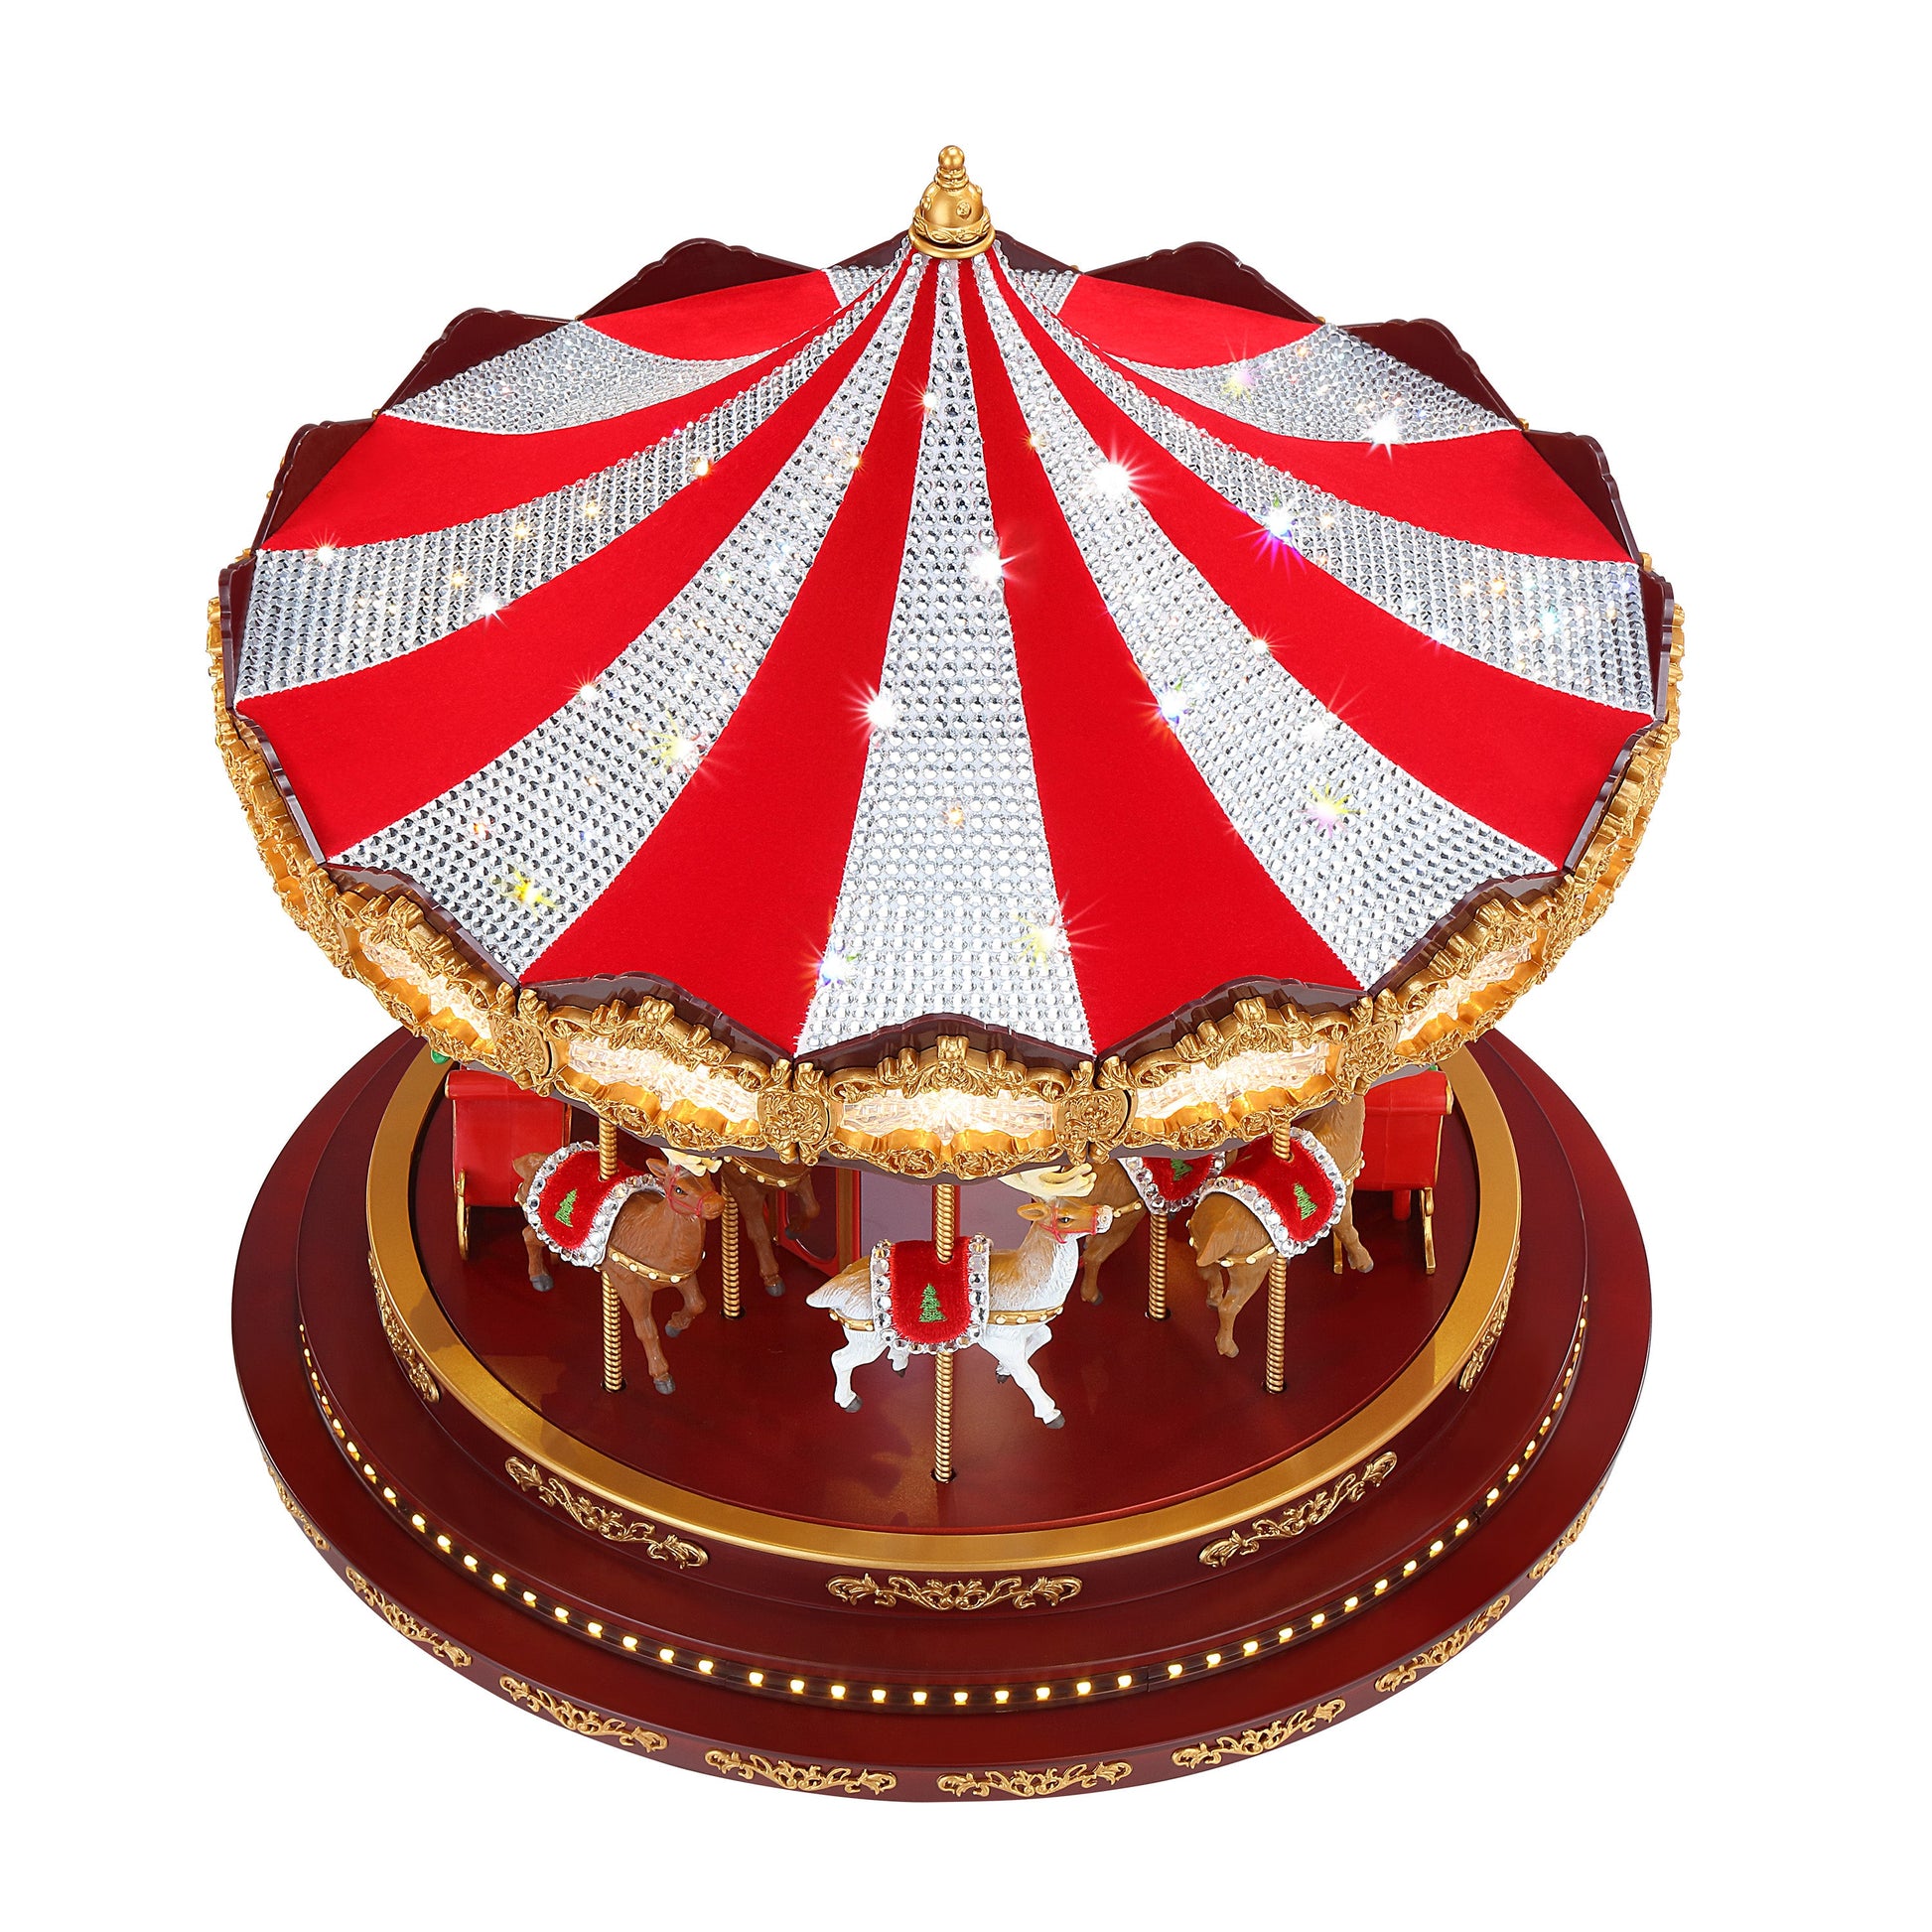 17" Deluxe Crystal Carousel - Mr. Christmas